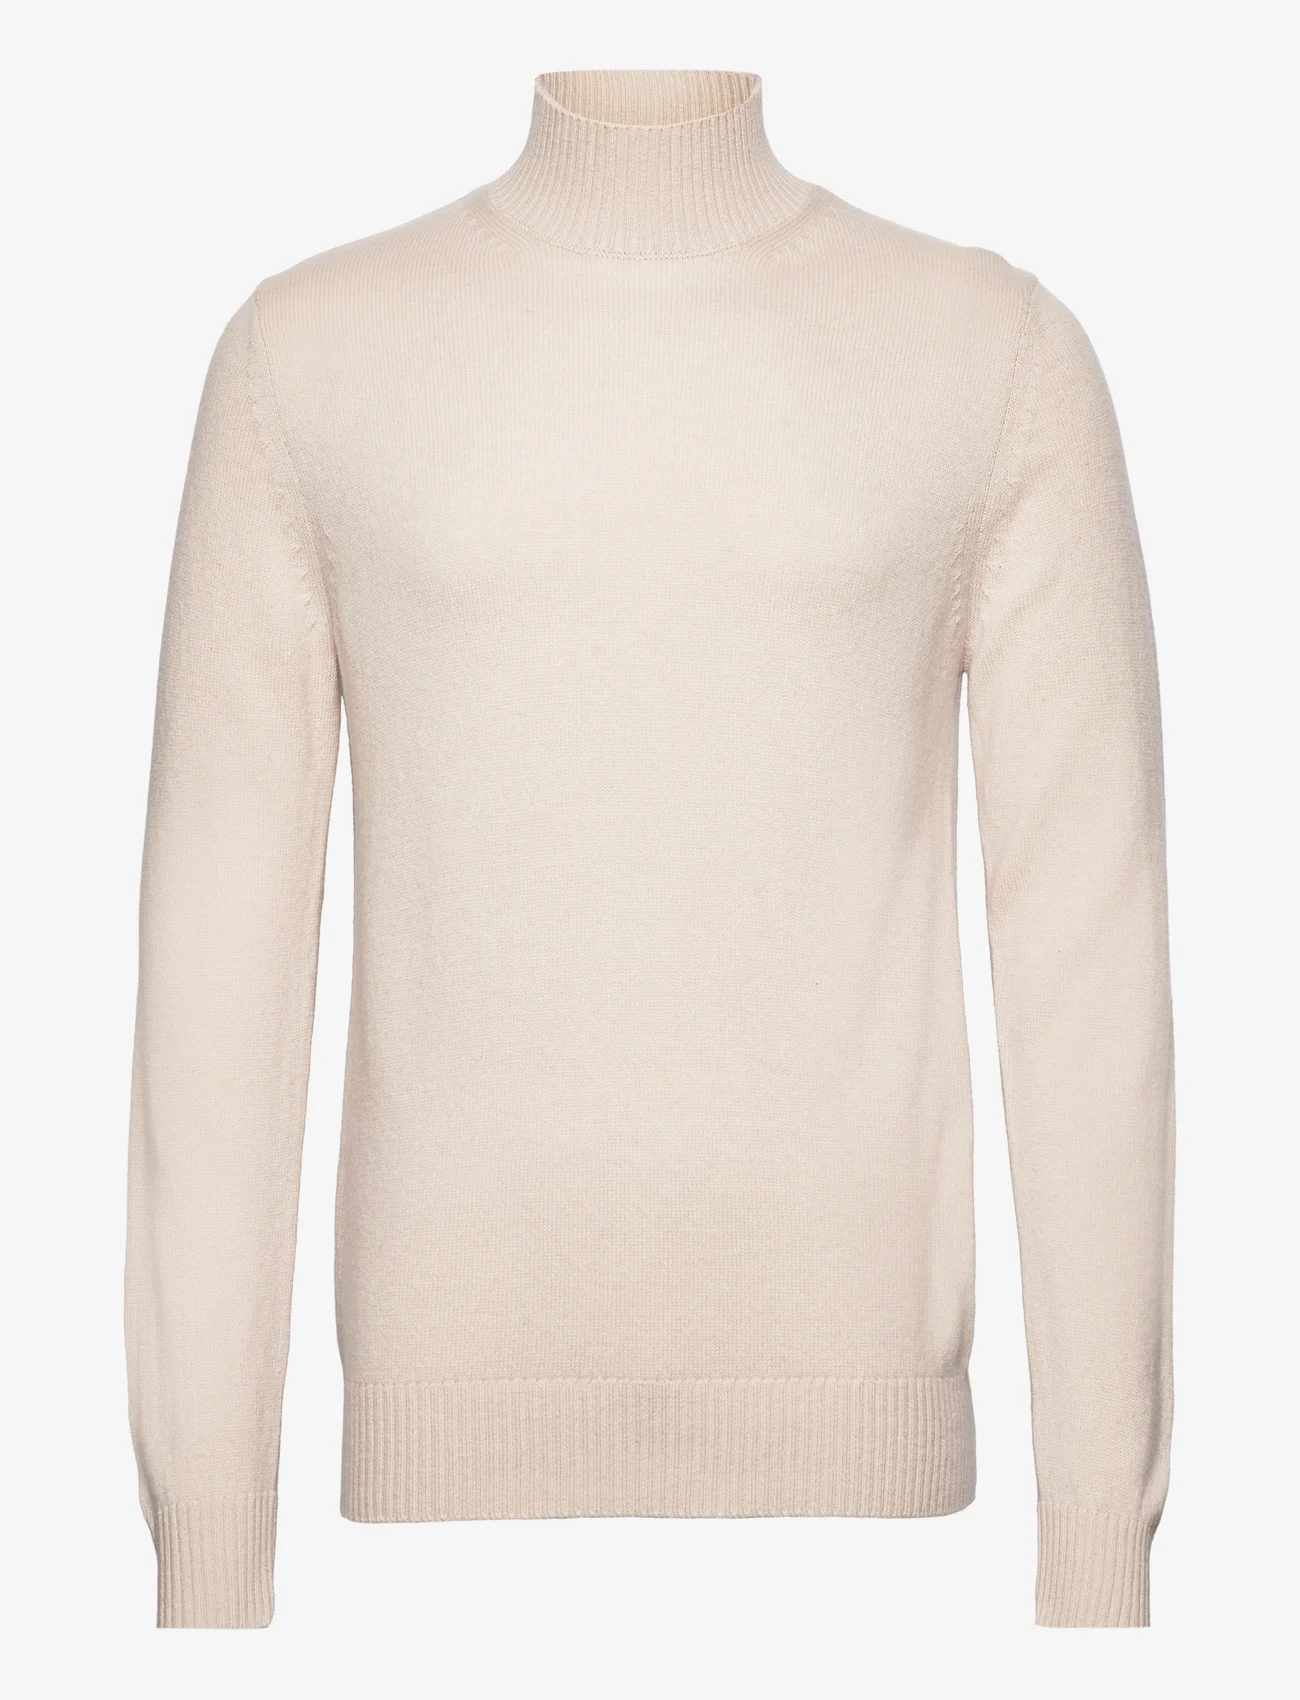 Selected Homme - SLHNEWCOBAN LS KNIT HIGH NECK W - golfy - oatmeal - 0